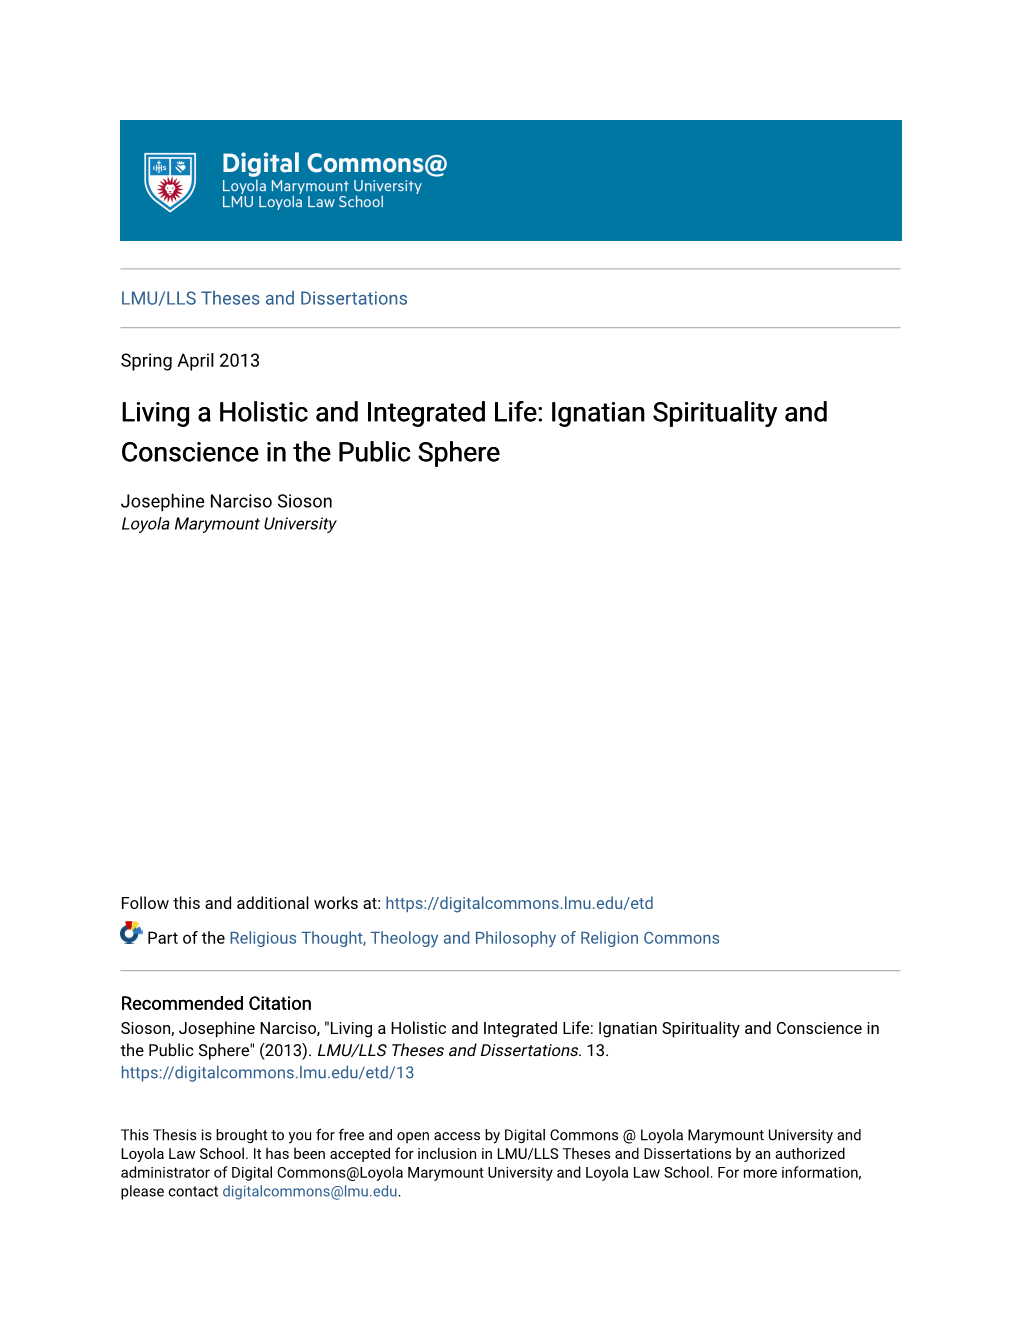 Living a Holistic and Integrated Life: Ignatian Spirituality and Conscience in the Public Sphere